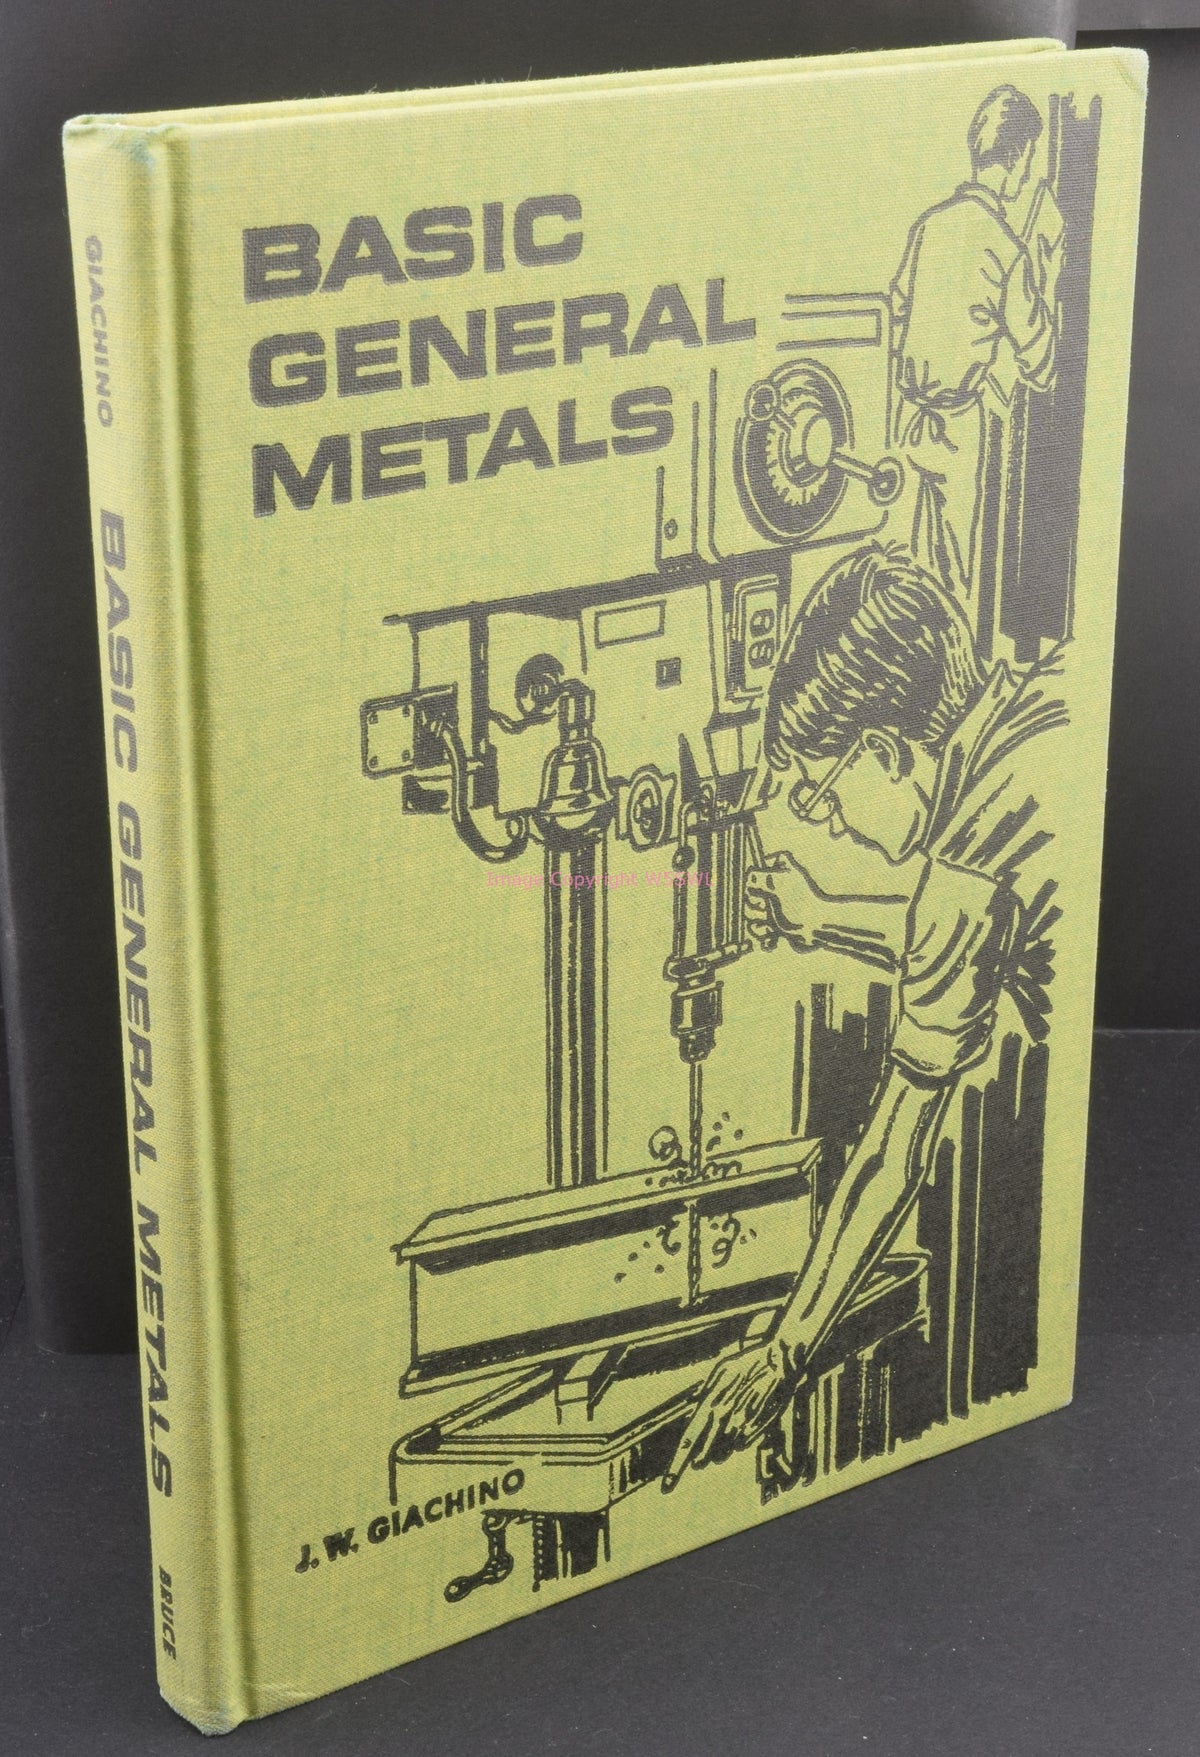 Basic General Metals - Dave's Hobby Shop by W5SWL